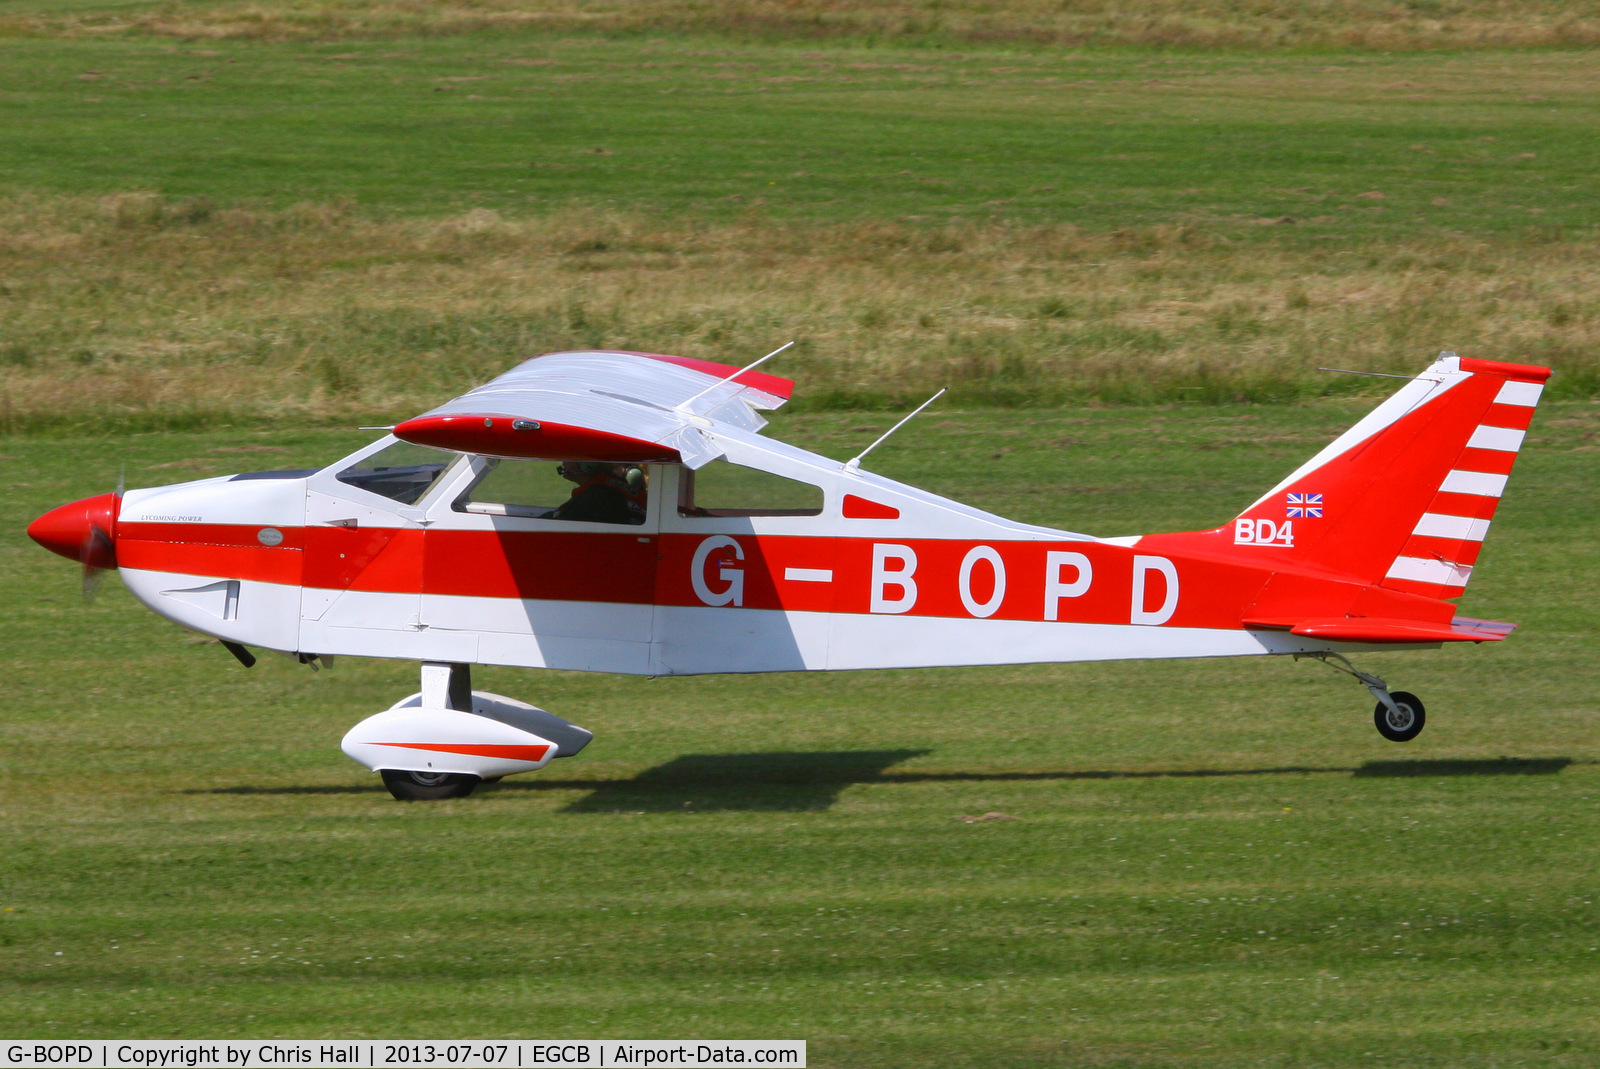 G-BOPD, 1974 Bede BD-4 C/N 632, at the Barton open day and fly in